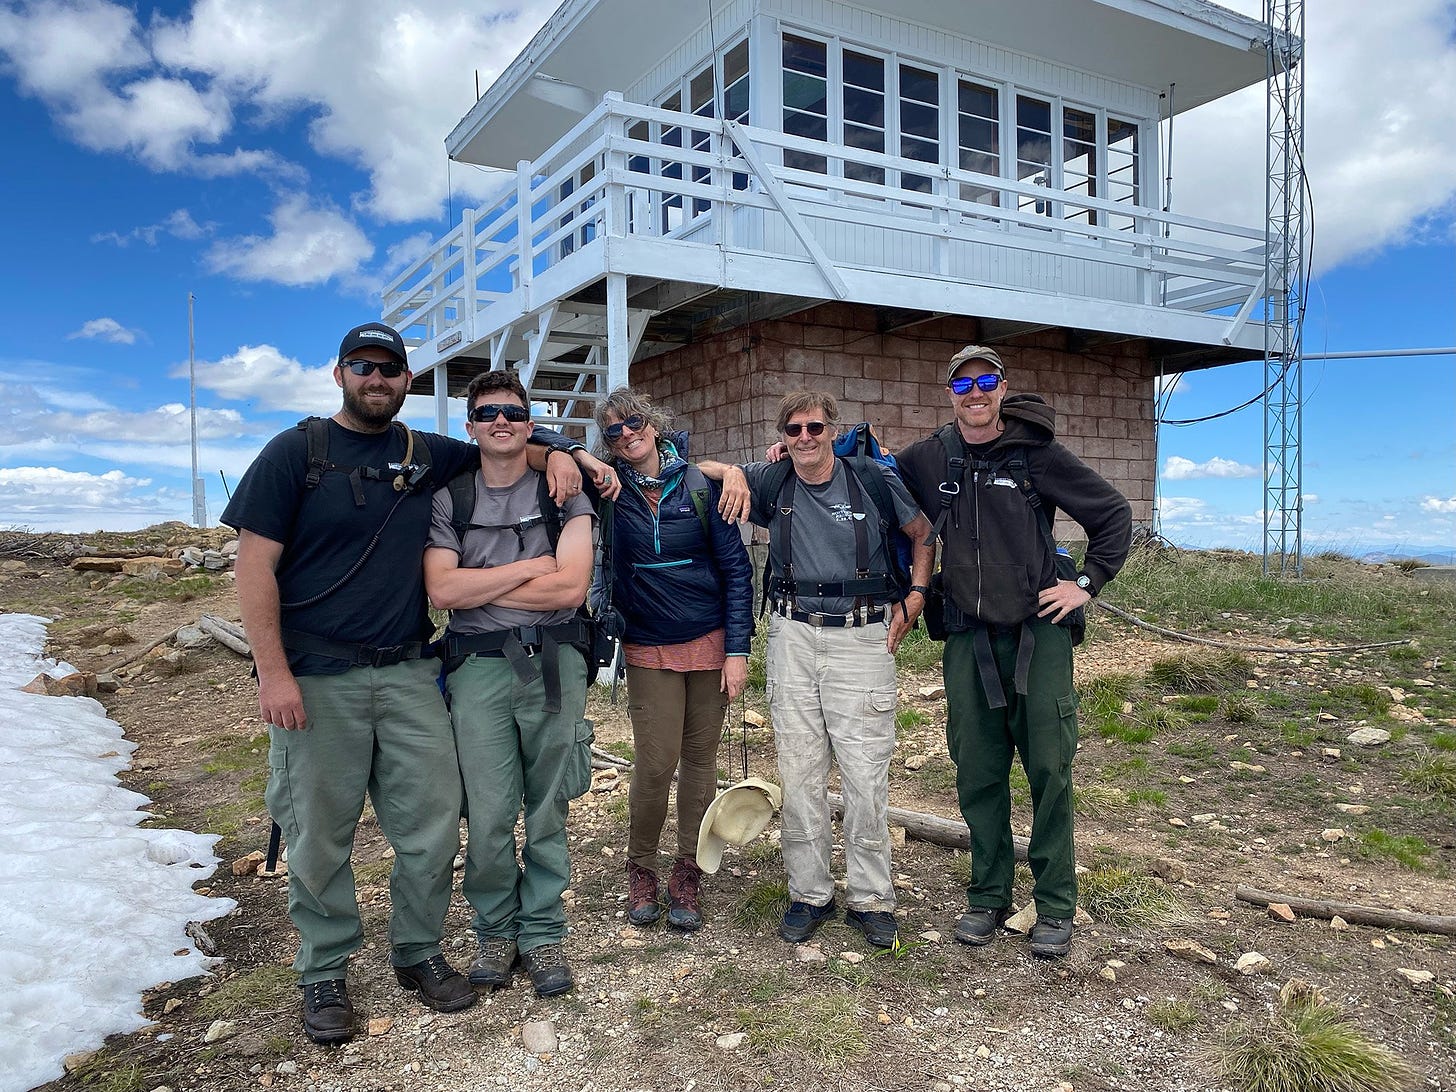 A group of people posing together outside of a white mountaintop tower.